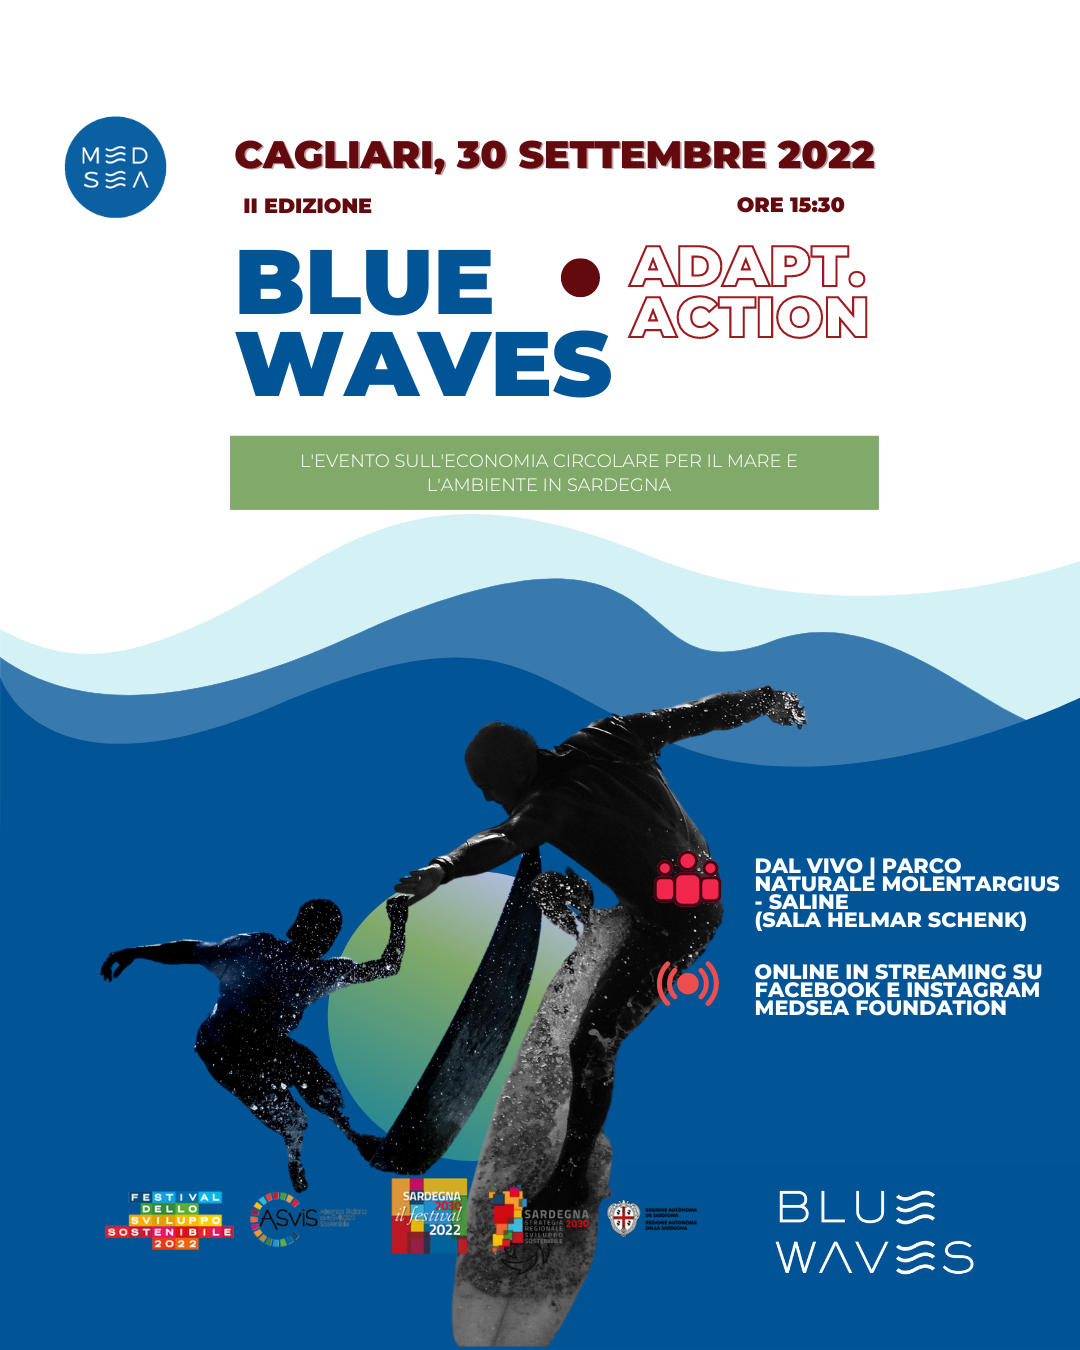 Blue Waves, the ADAPT.Action edition is dedicated to climate change: September, 30th in Cagliari